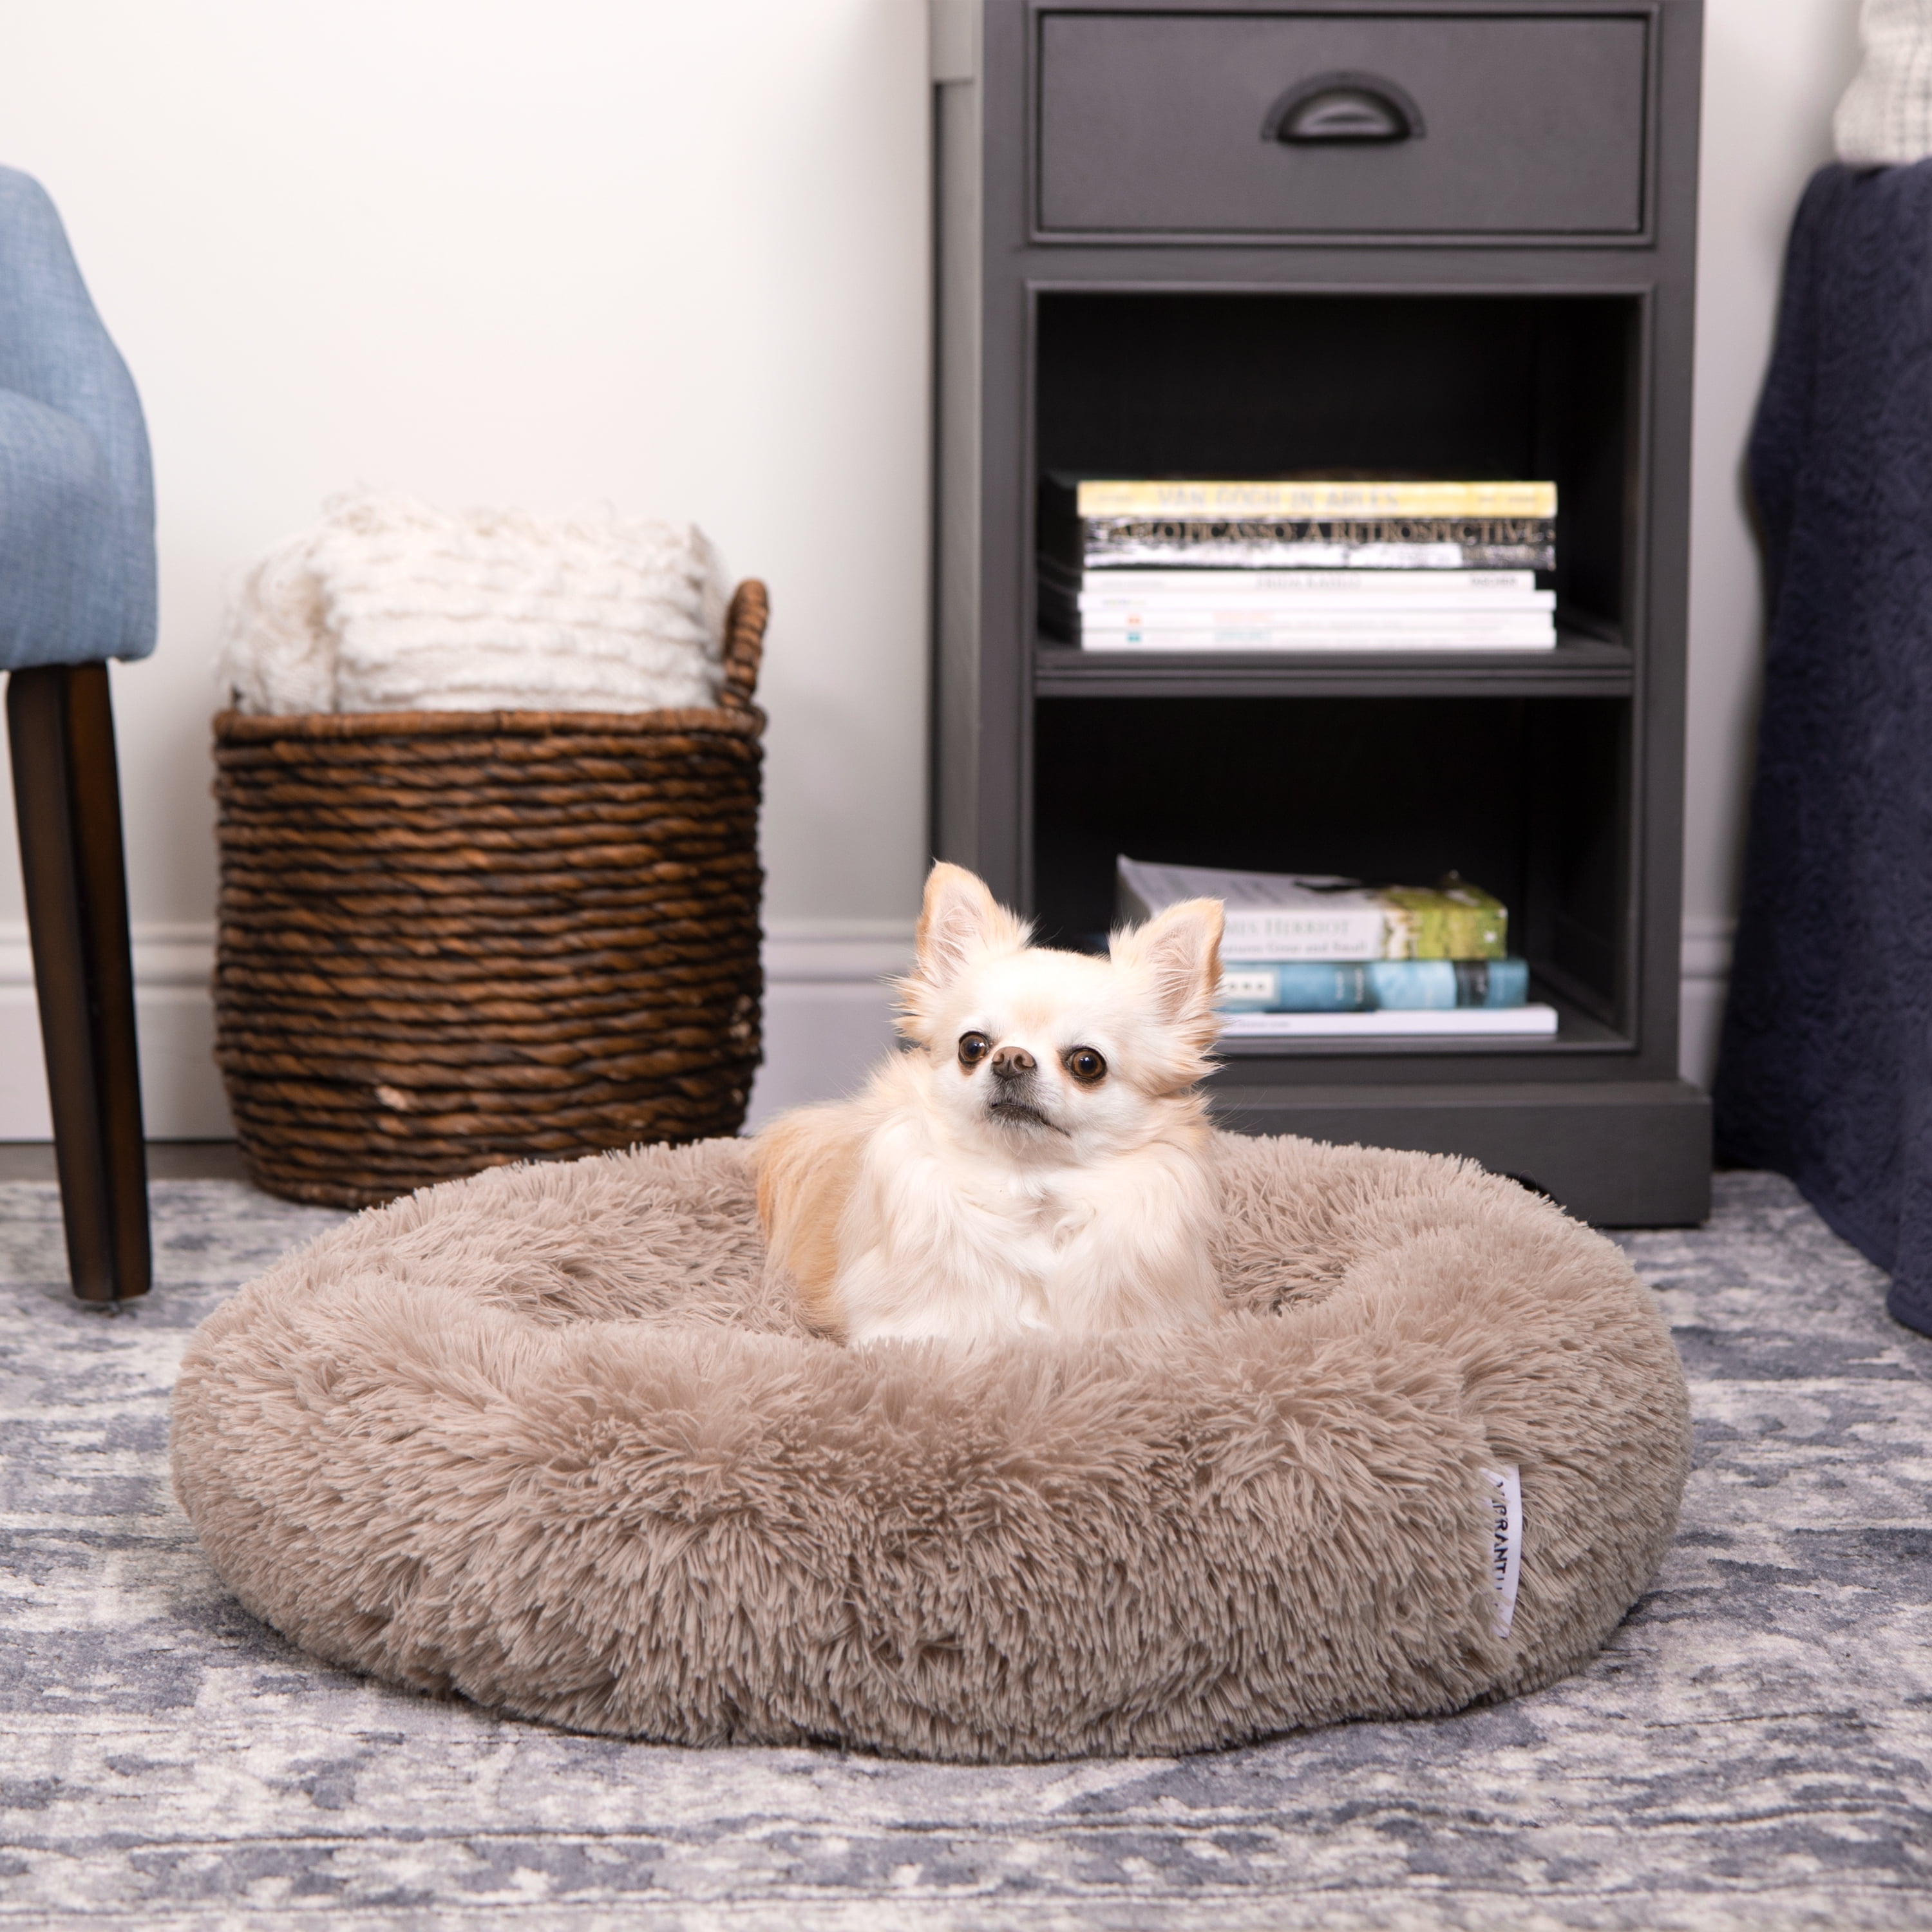 Vibrant Life Small Cozy Luxe Crate Mat Pet Bed, Gray 